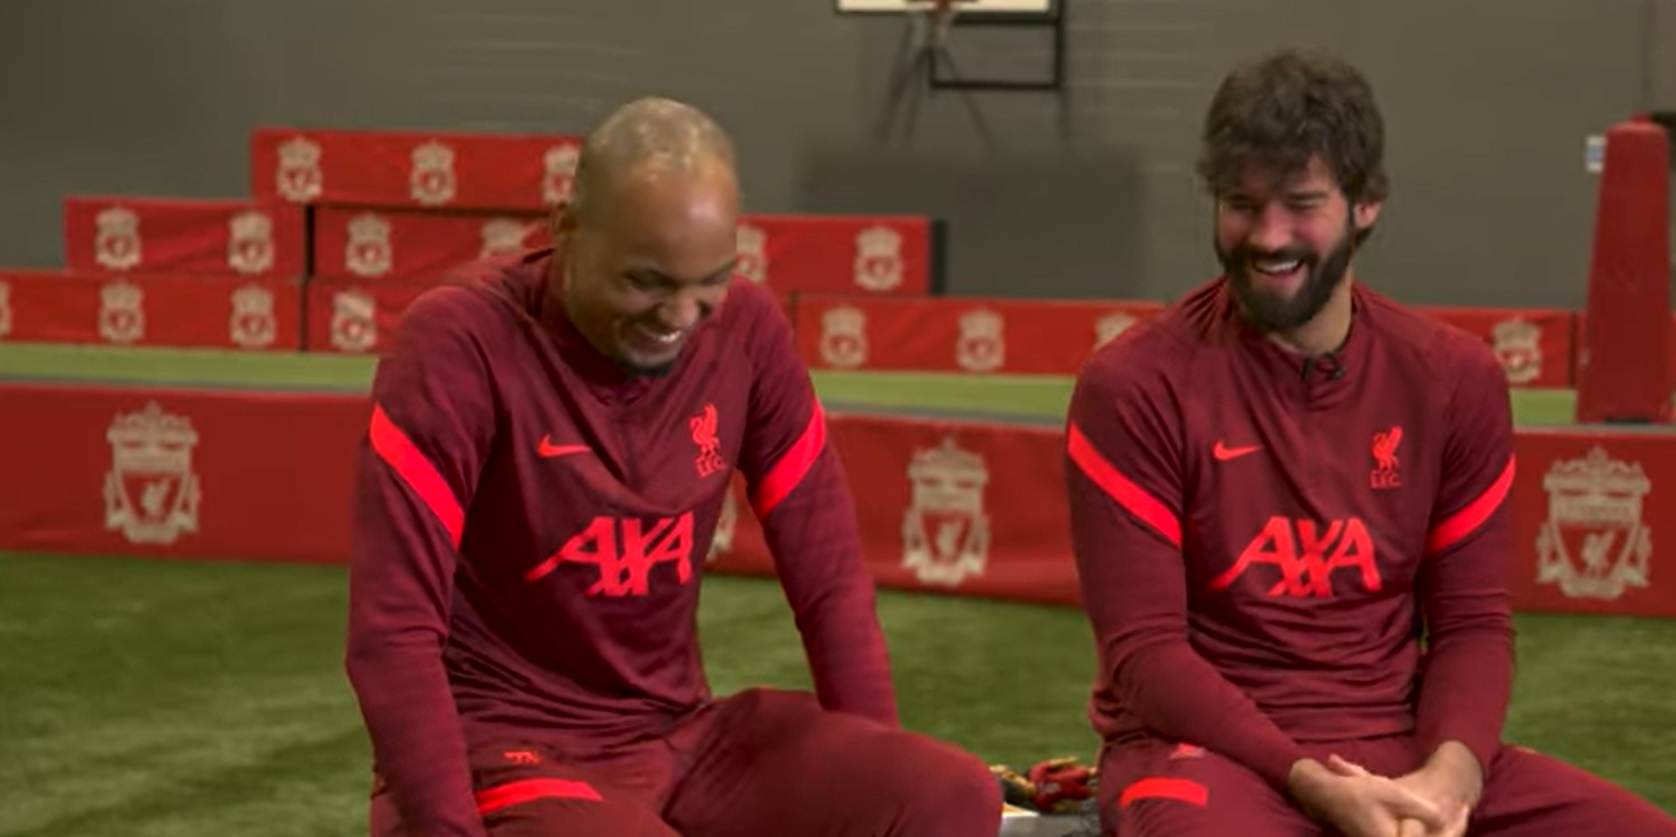 (Video) ‘Would you rather fight 10 duck-sized Joel Matips?’ – Hilarious scenario game has Alisson & Fabinho in giggles